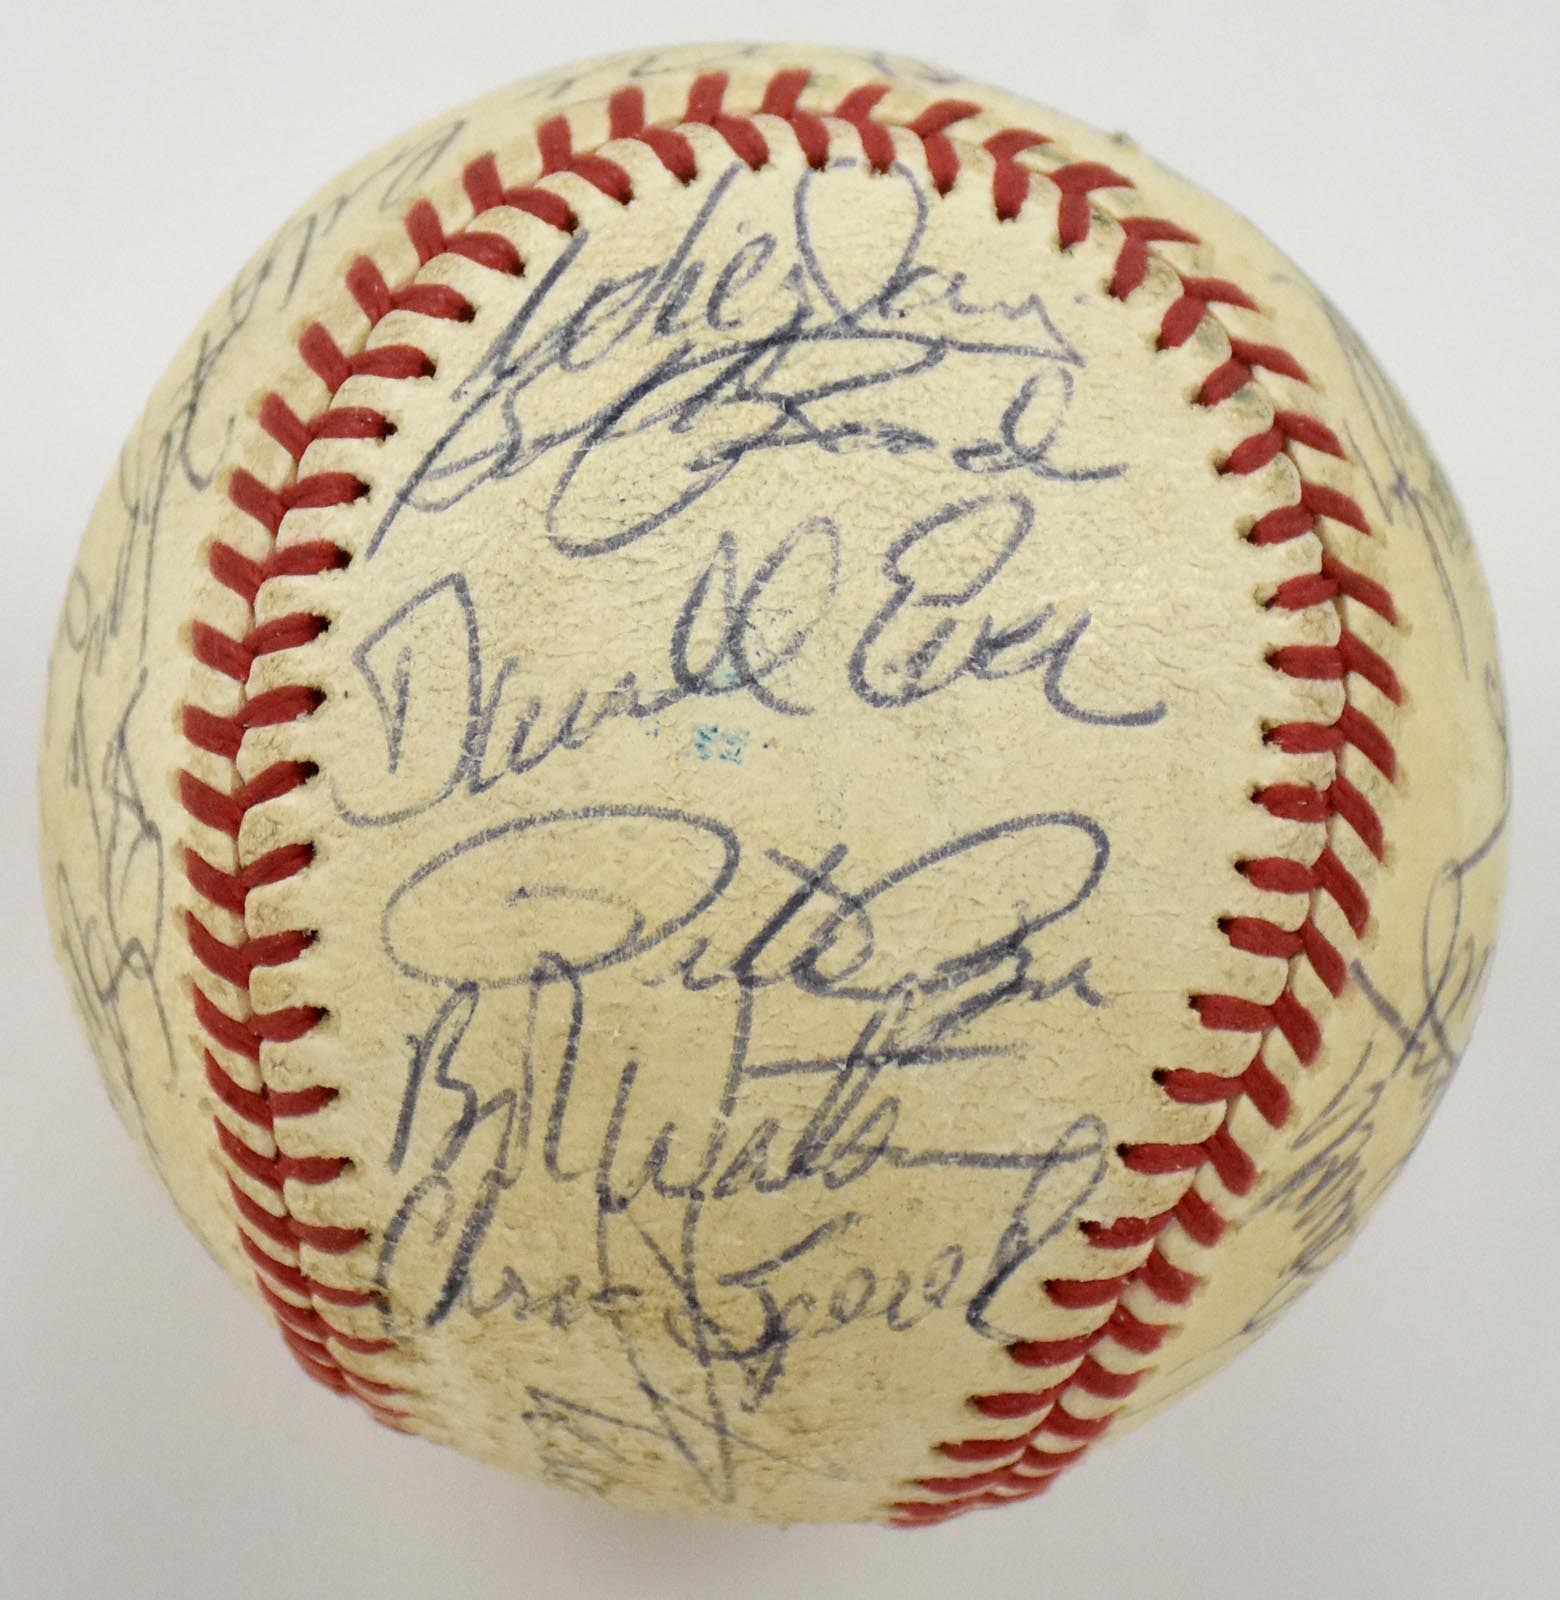 1973 National League All Star Game Signed Baseball